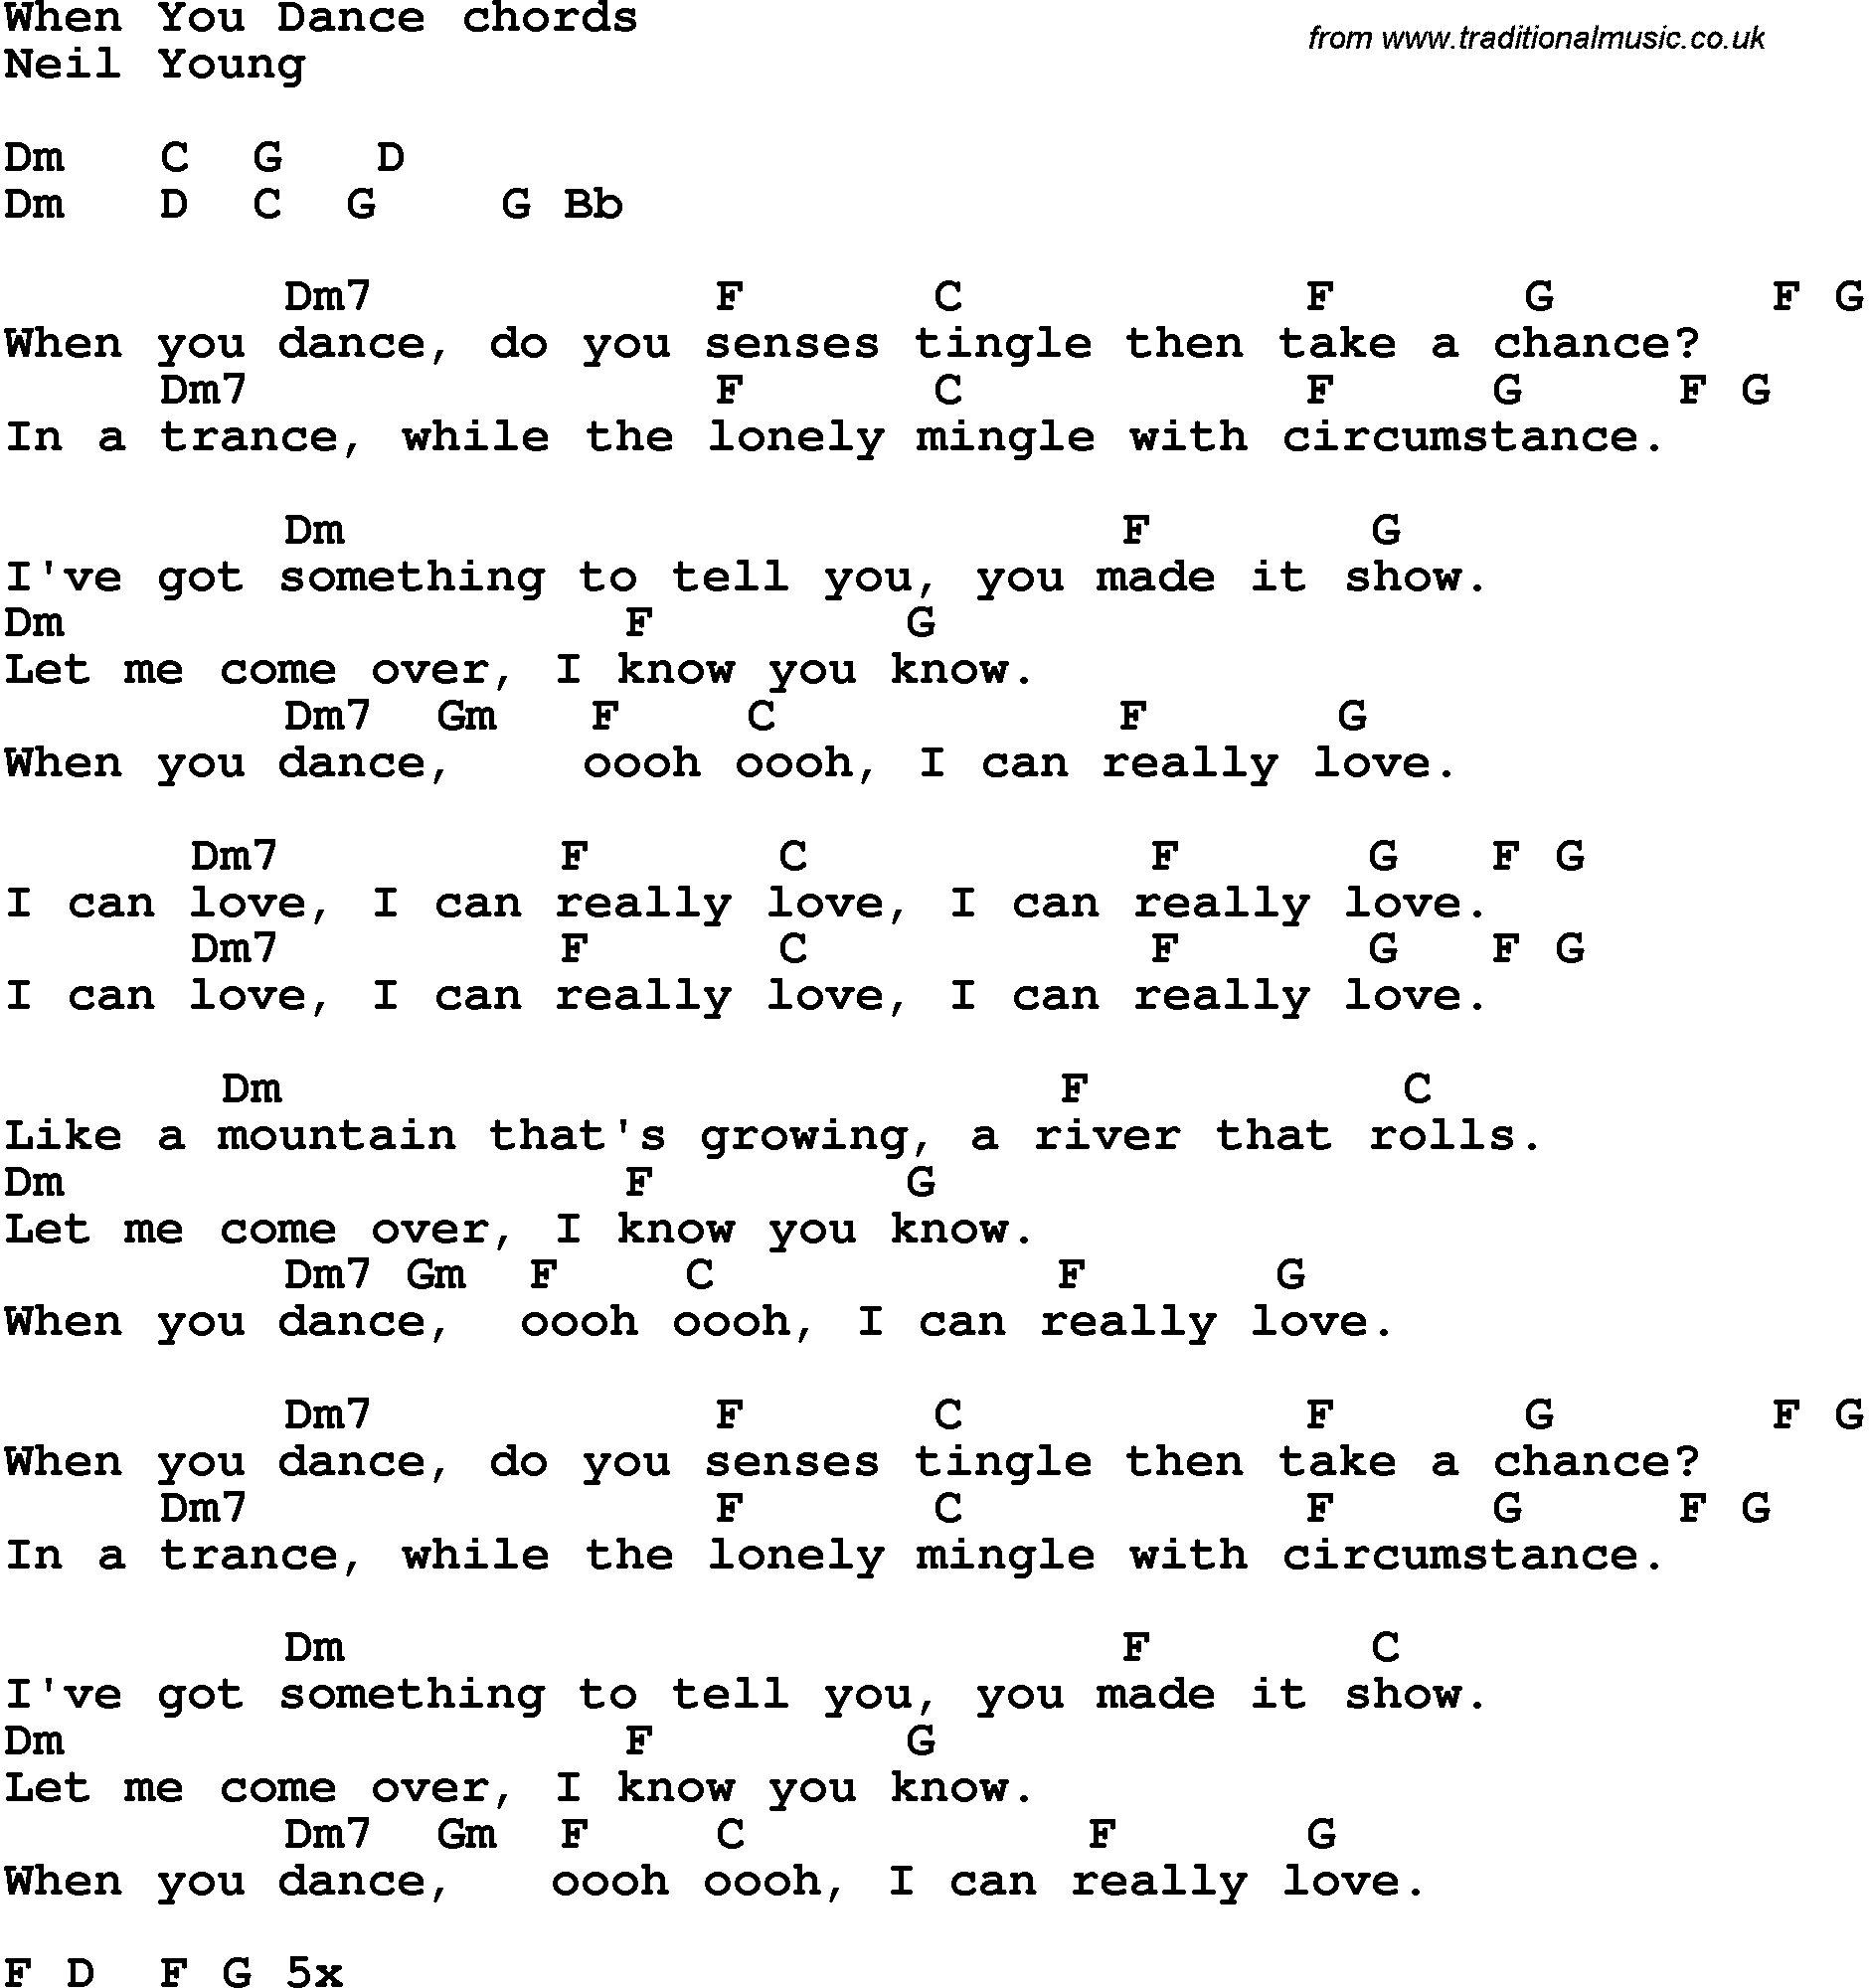 Song Lyrics with guitar chords for When You Dance